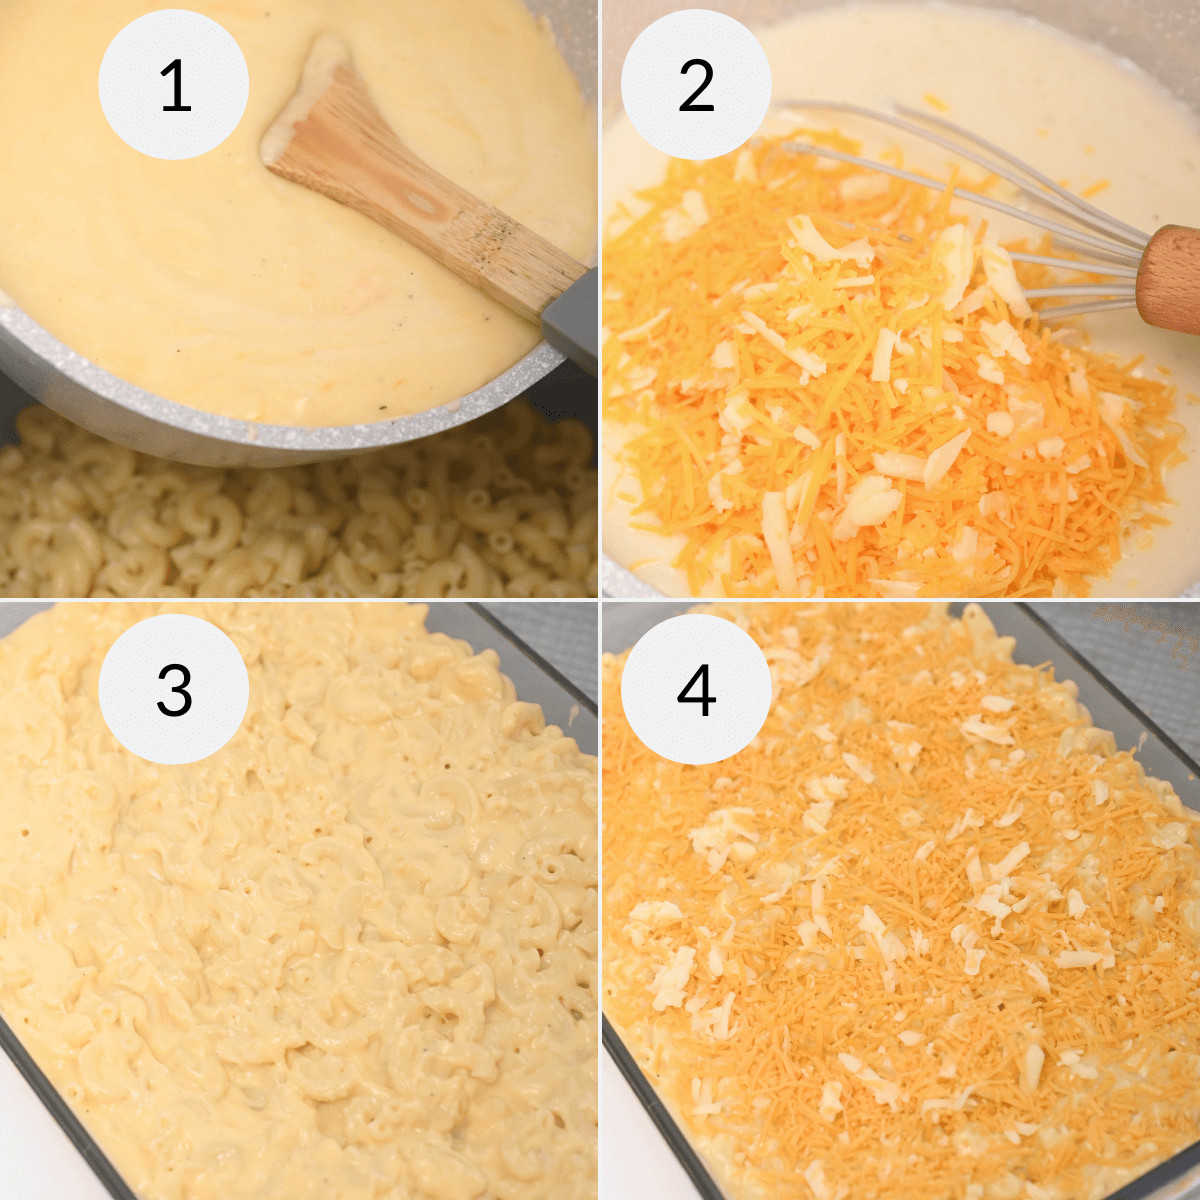 Mixing the pasta and cheese and placing in the oven.